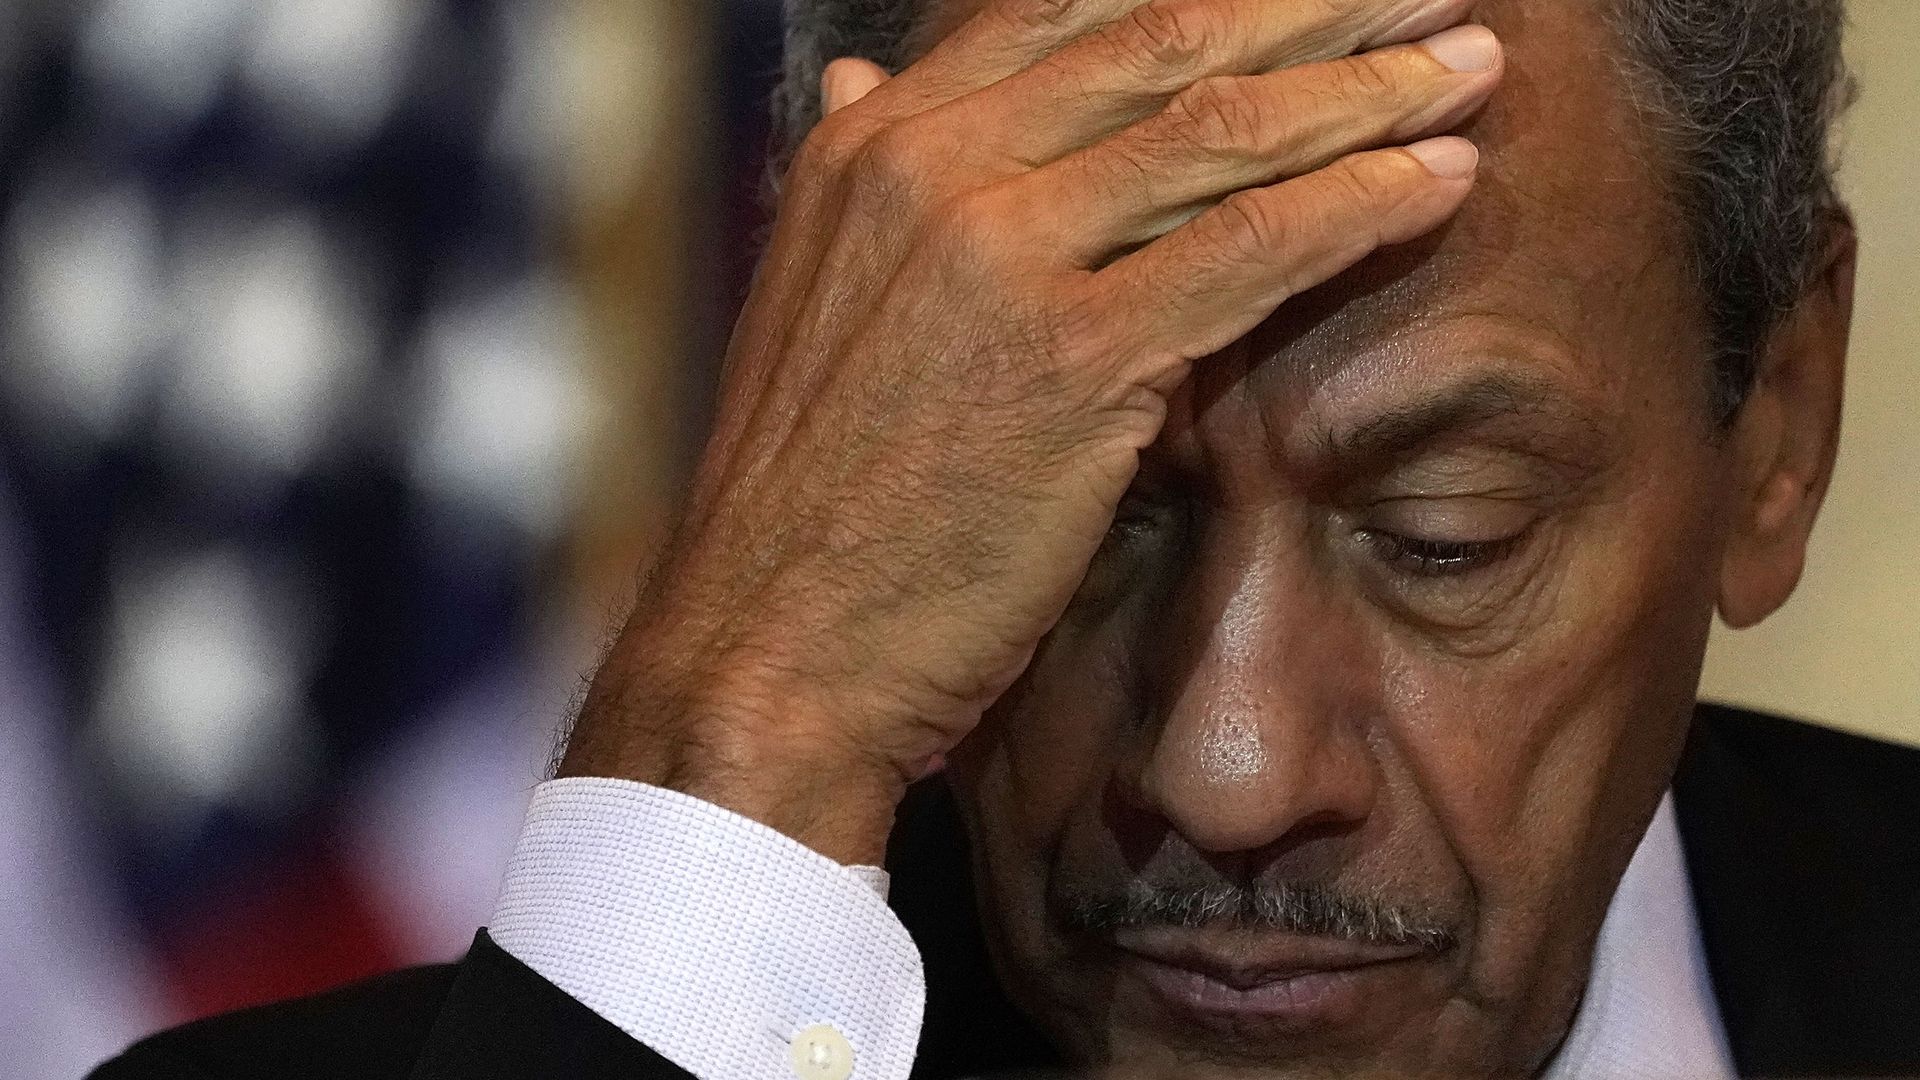 In this image, former congressman Mel Watt looks down and away from the camera, partially covering his face with one hand.